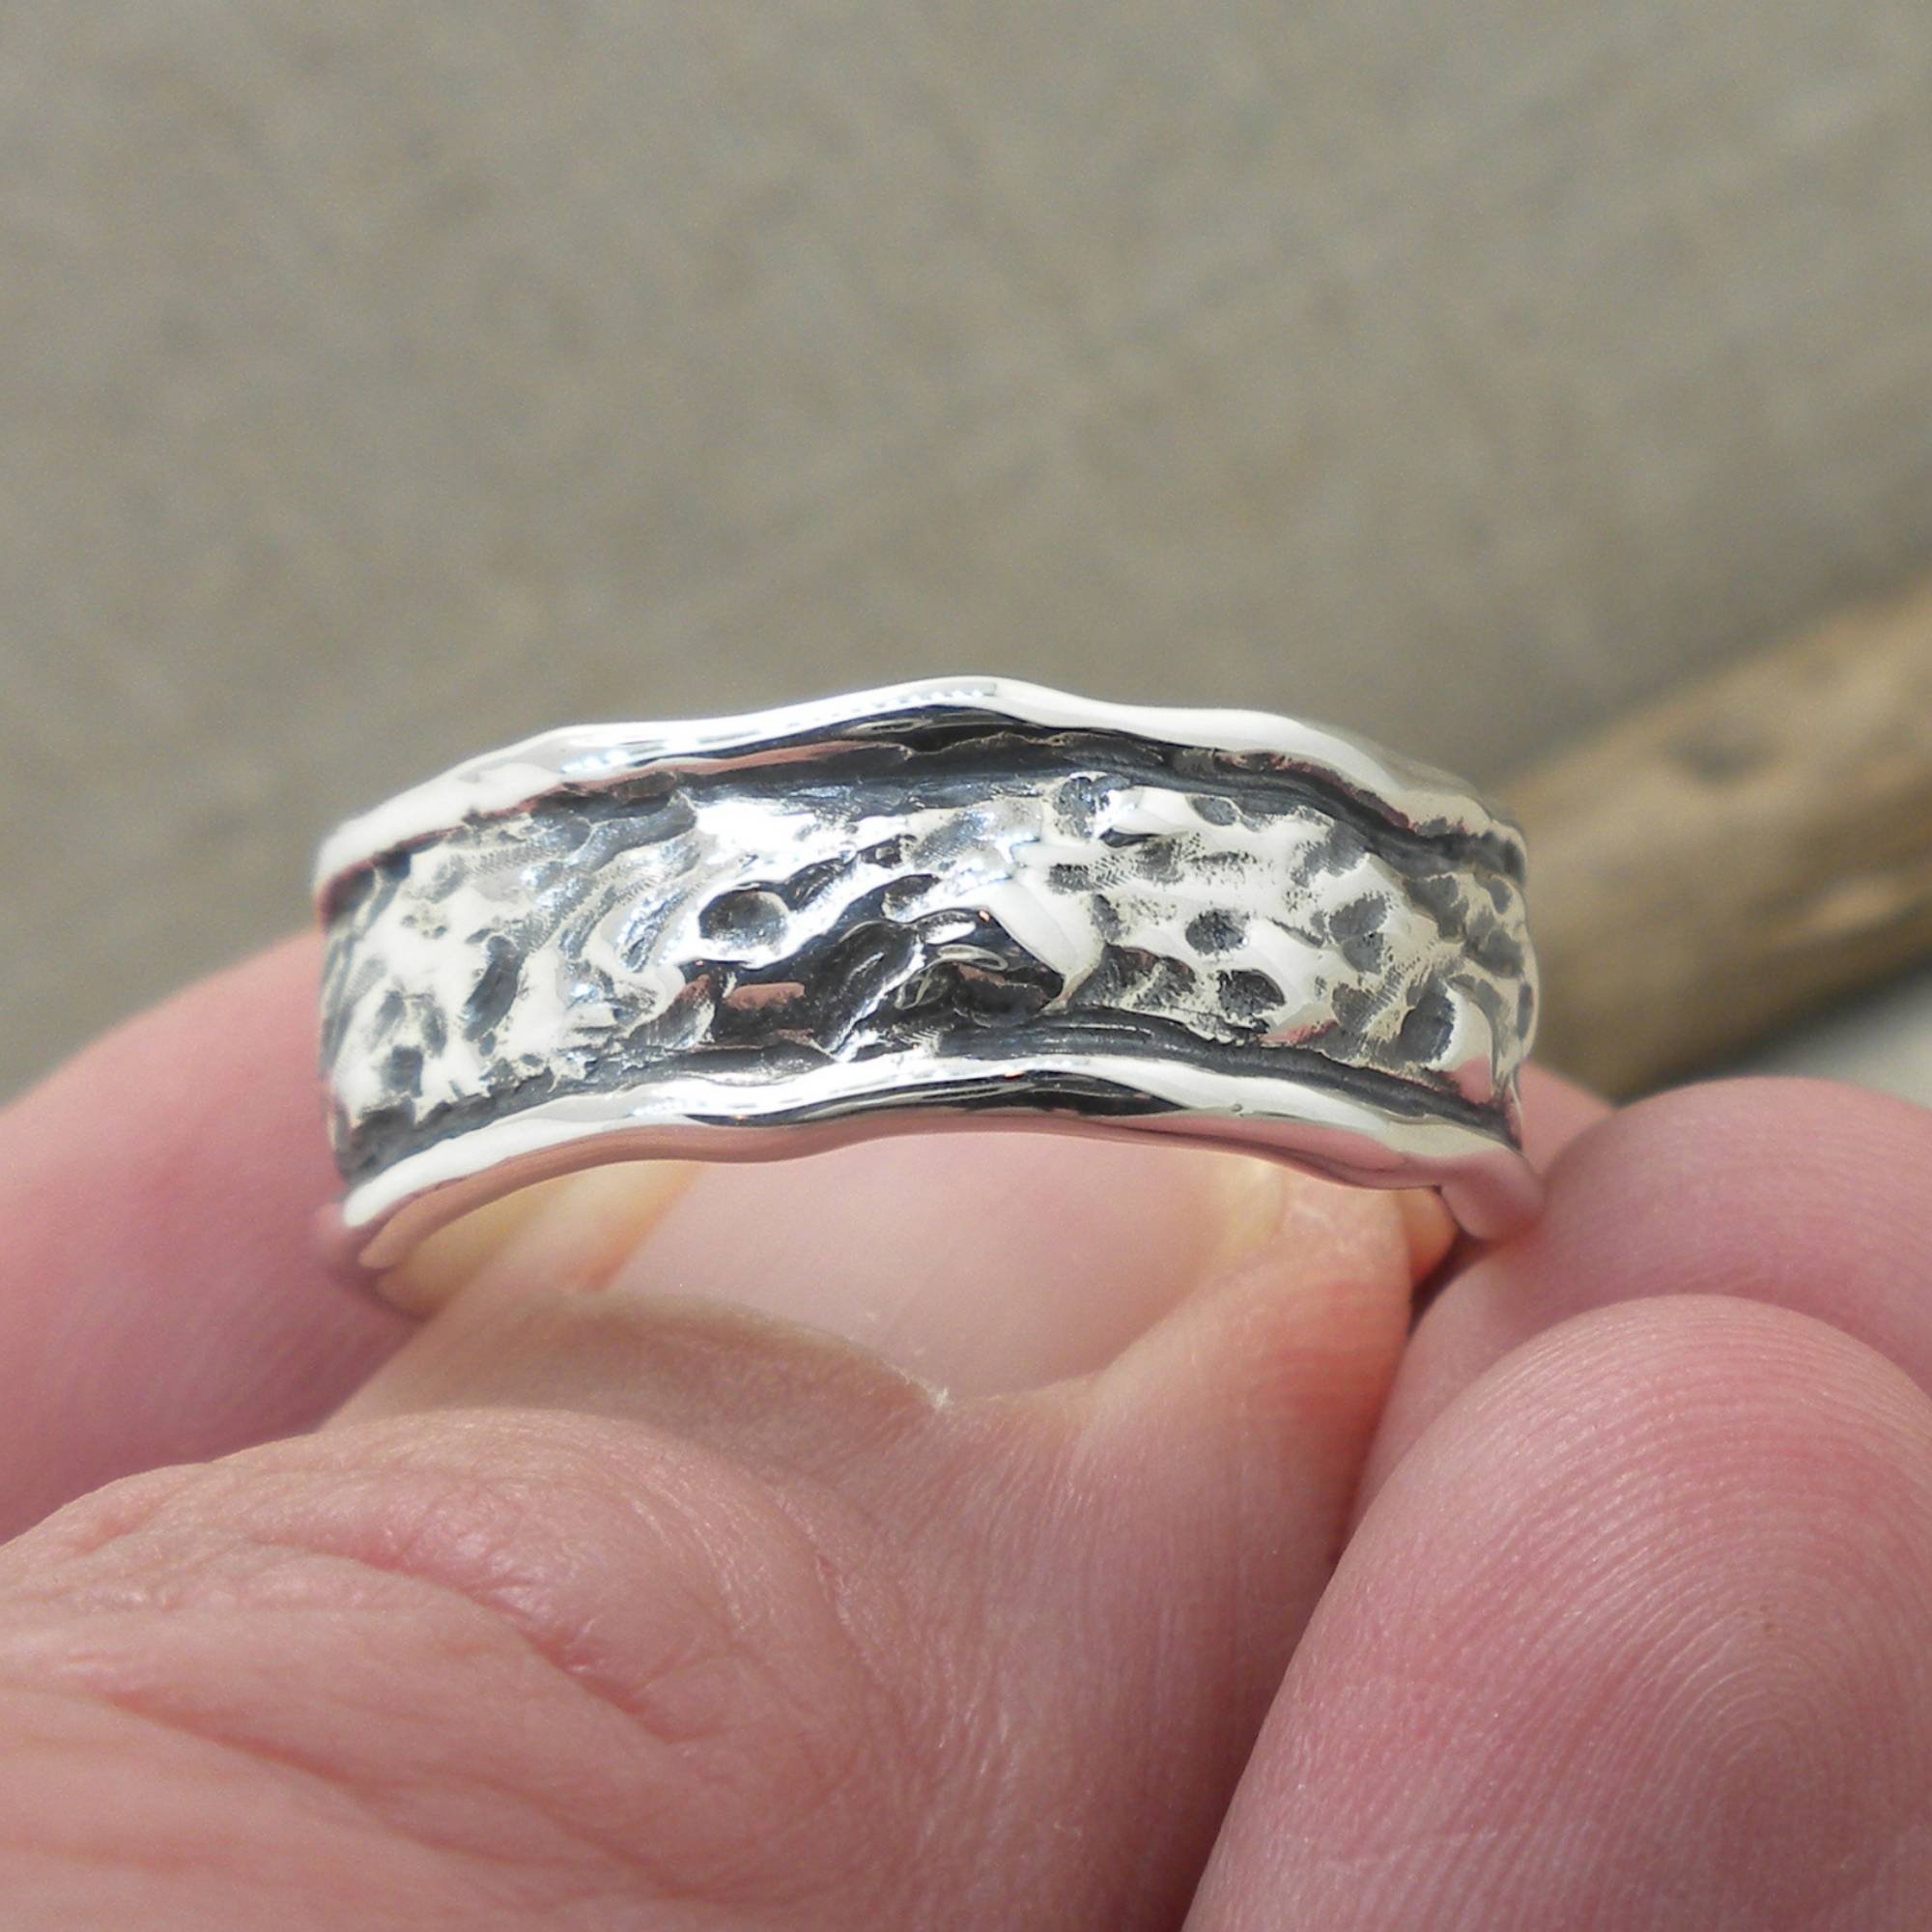 9 mm Wide Sterling Silver with CZs Rocks 'N Rivers Spiral Wedding Ring 